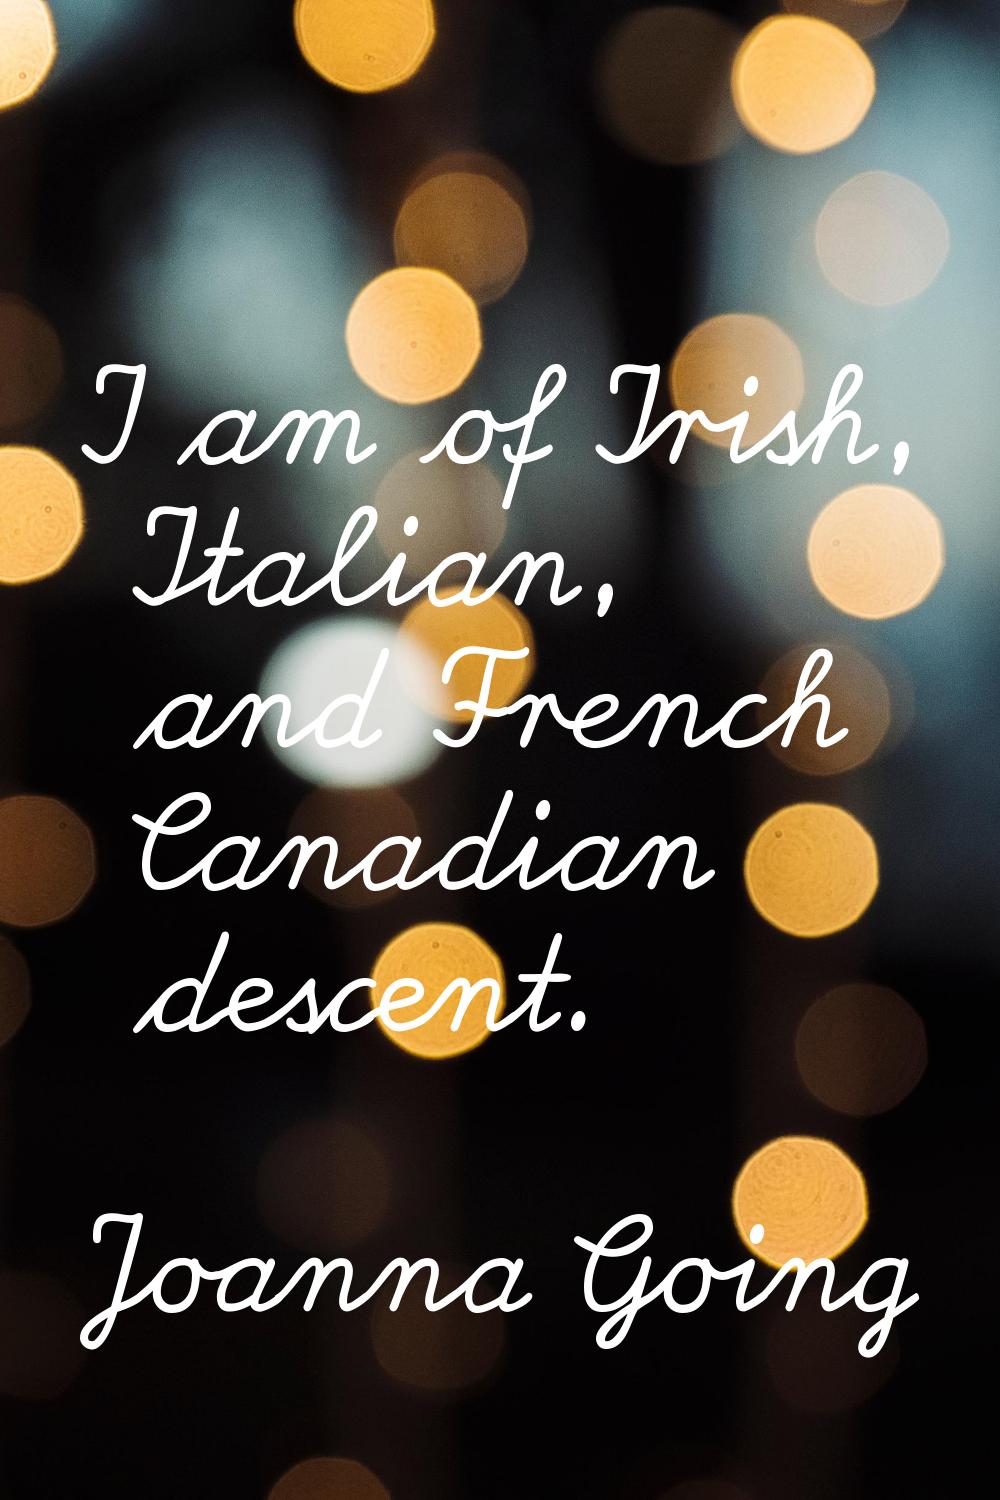 I am of Irish, Italian, and French Canadian descent.